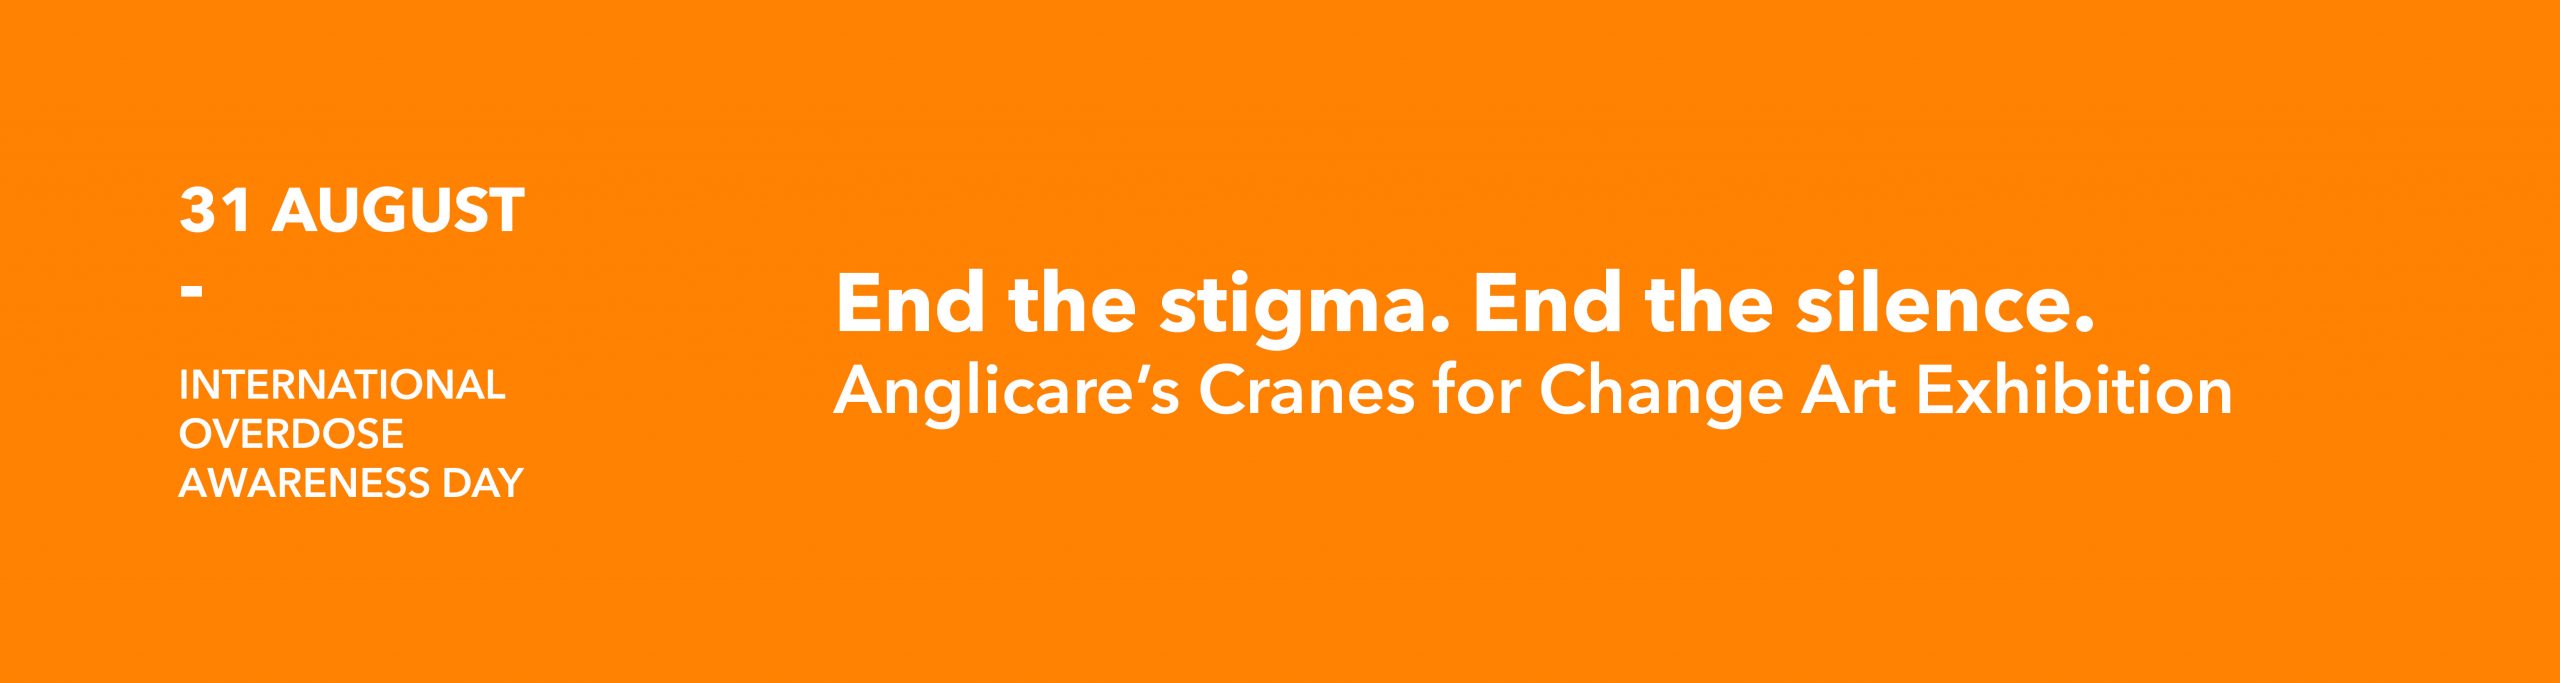 Anglicare's Cranes for Change Art Exhibition for International Overdose Awareness Day